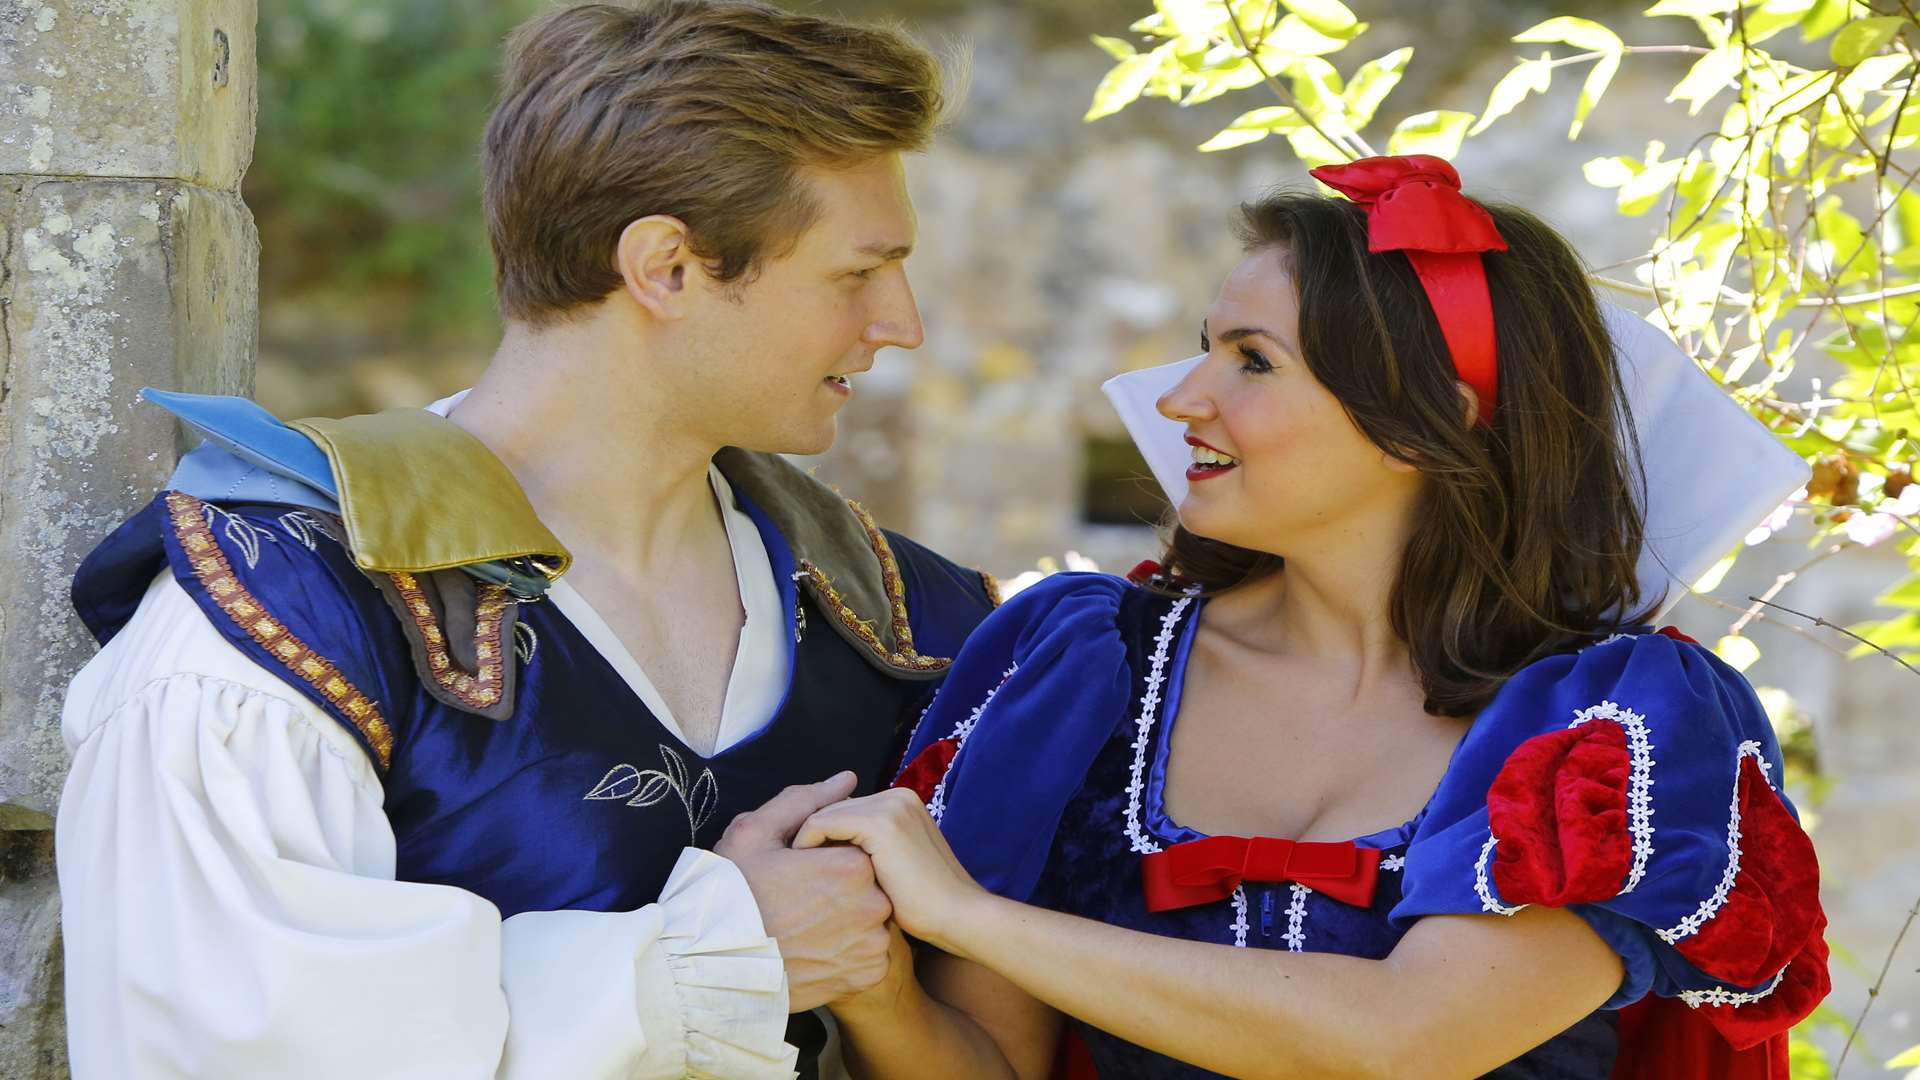 Chris Warner Drake as the handsome prince and Millie Booth as Snow White